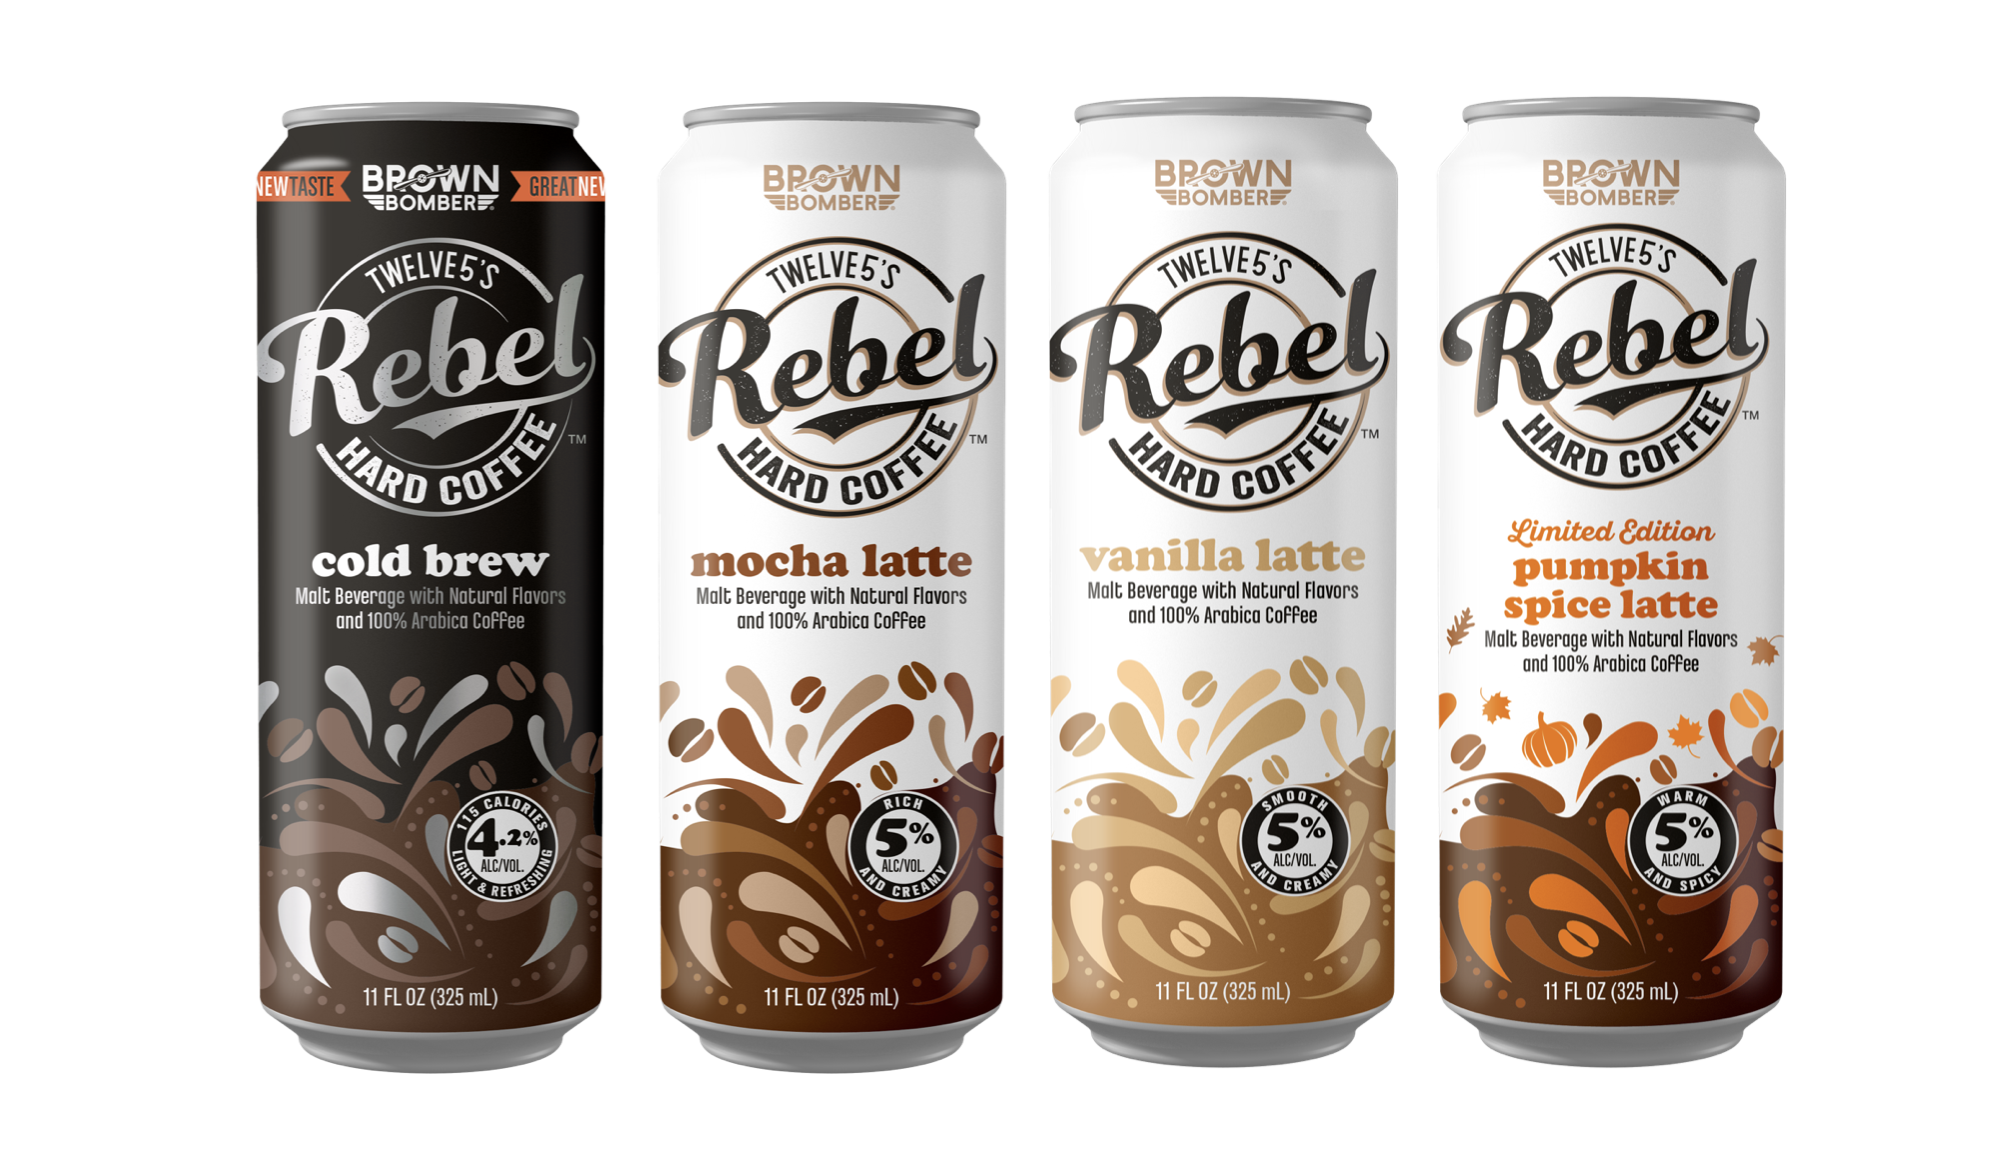 Twelve5 Beverage Co. Rebel Hard Coffee lineup of flavors that includes Hard Cold Brew, Mocha Hard Latte, Vanilla Hard Latte, and the Limited Edition Pumpkin Spice Hard Latte.